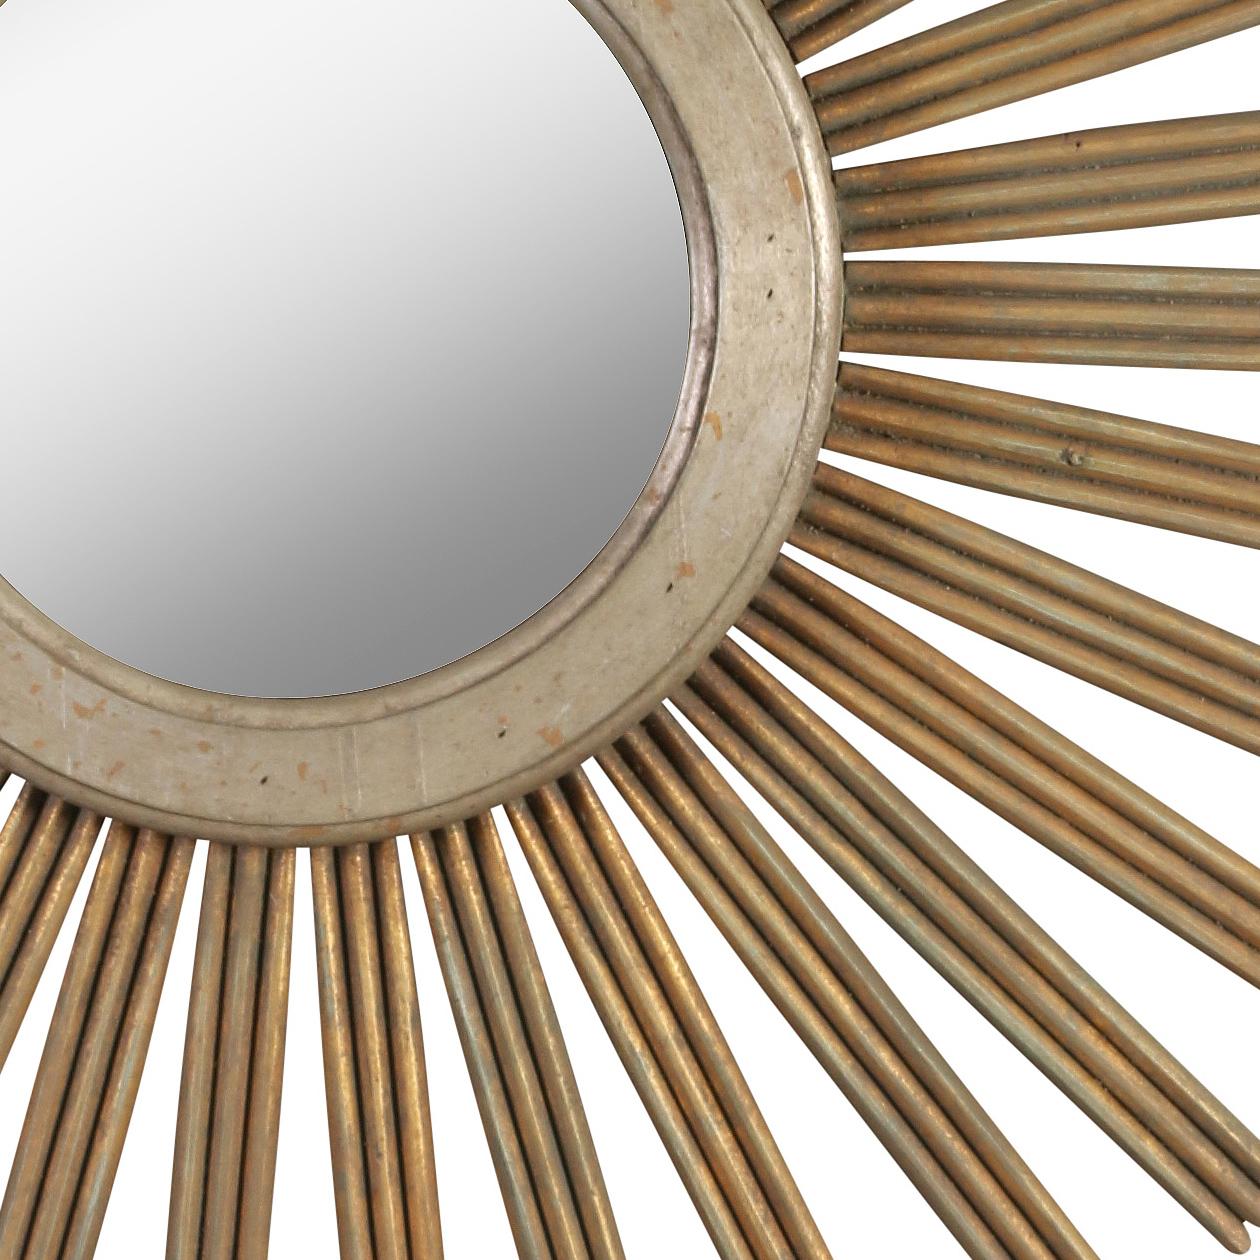 A Large Painted Sunburst Mirror  In Excellent Condition For Sale In New York, NY